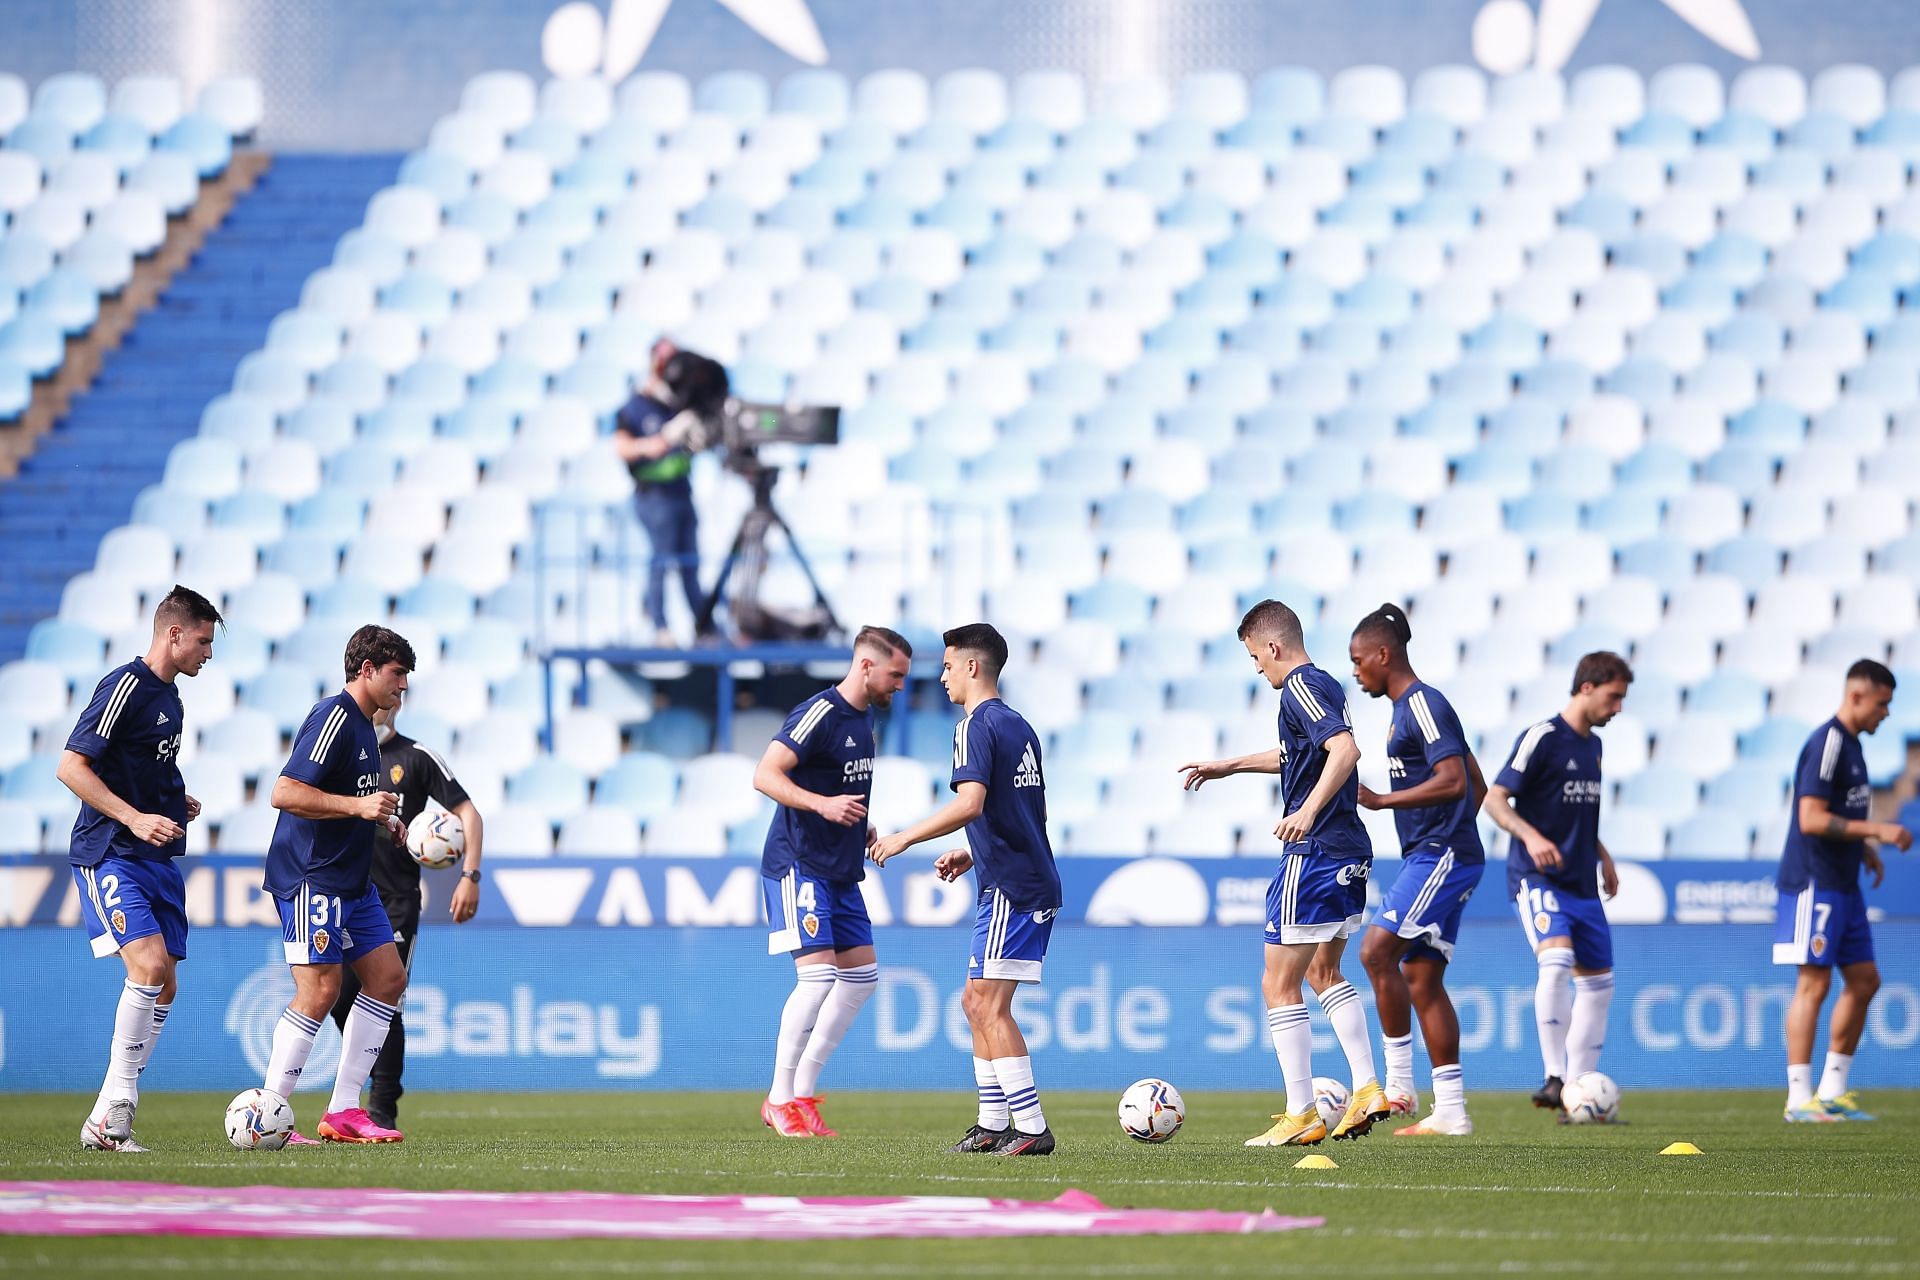 Real Zaragoza will welcome Leganes on Monday